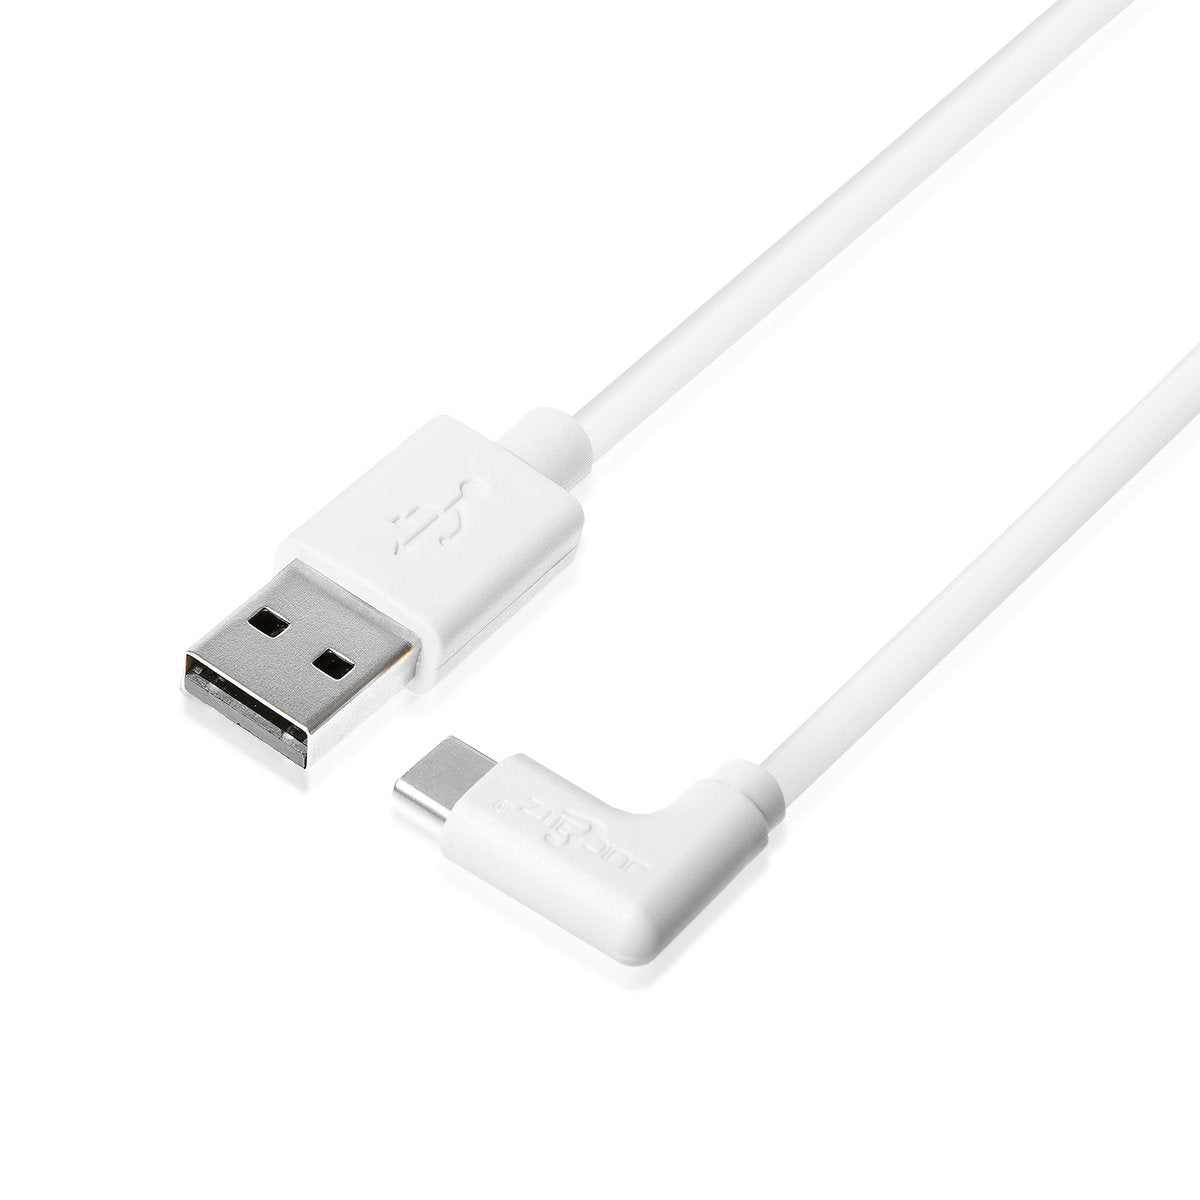 USB 2.0 Male to Angled USB-C 3A Fast Charger Data Cable - White